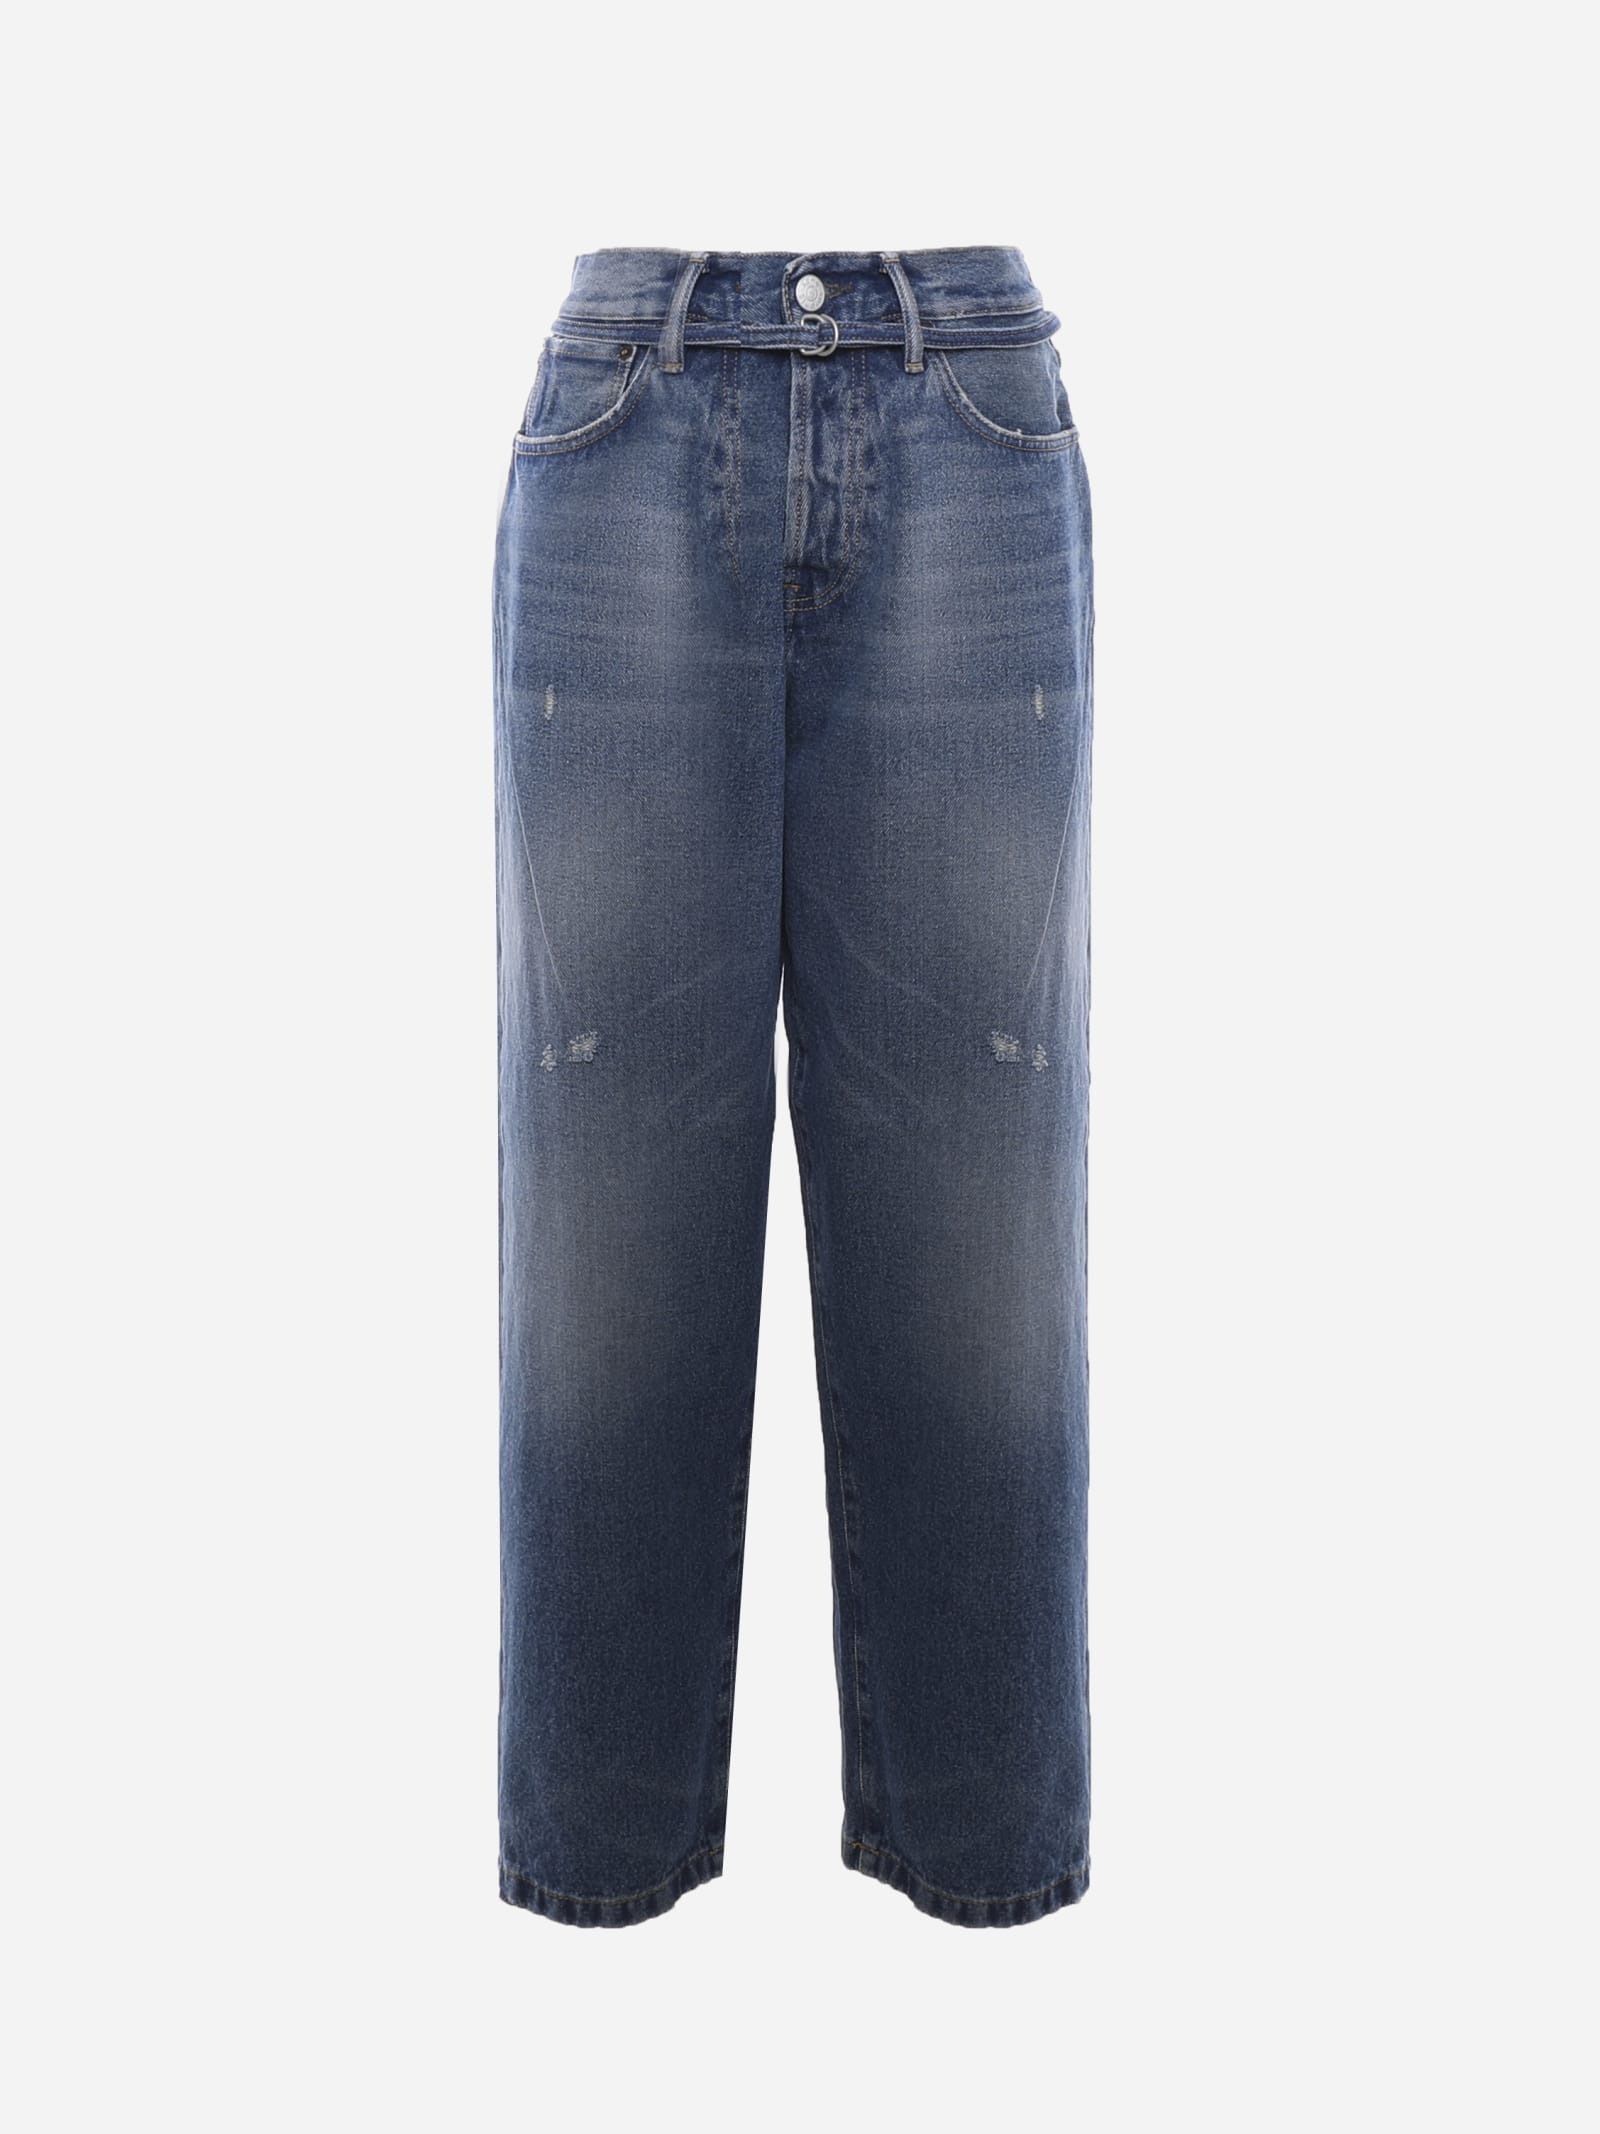 Acne Studios Loose Fit Jeans Made Of Cotton Denim